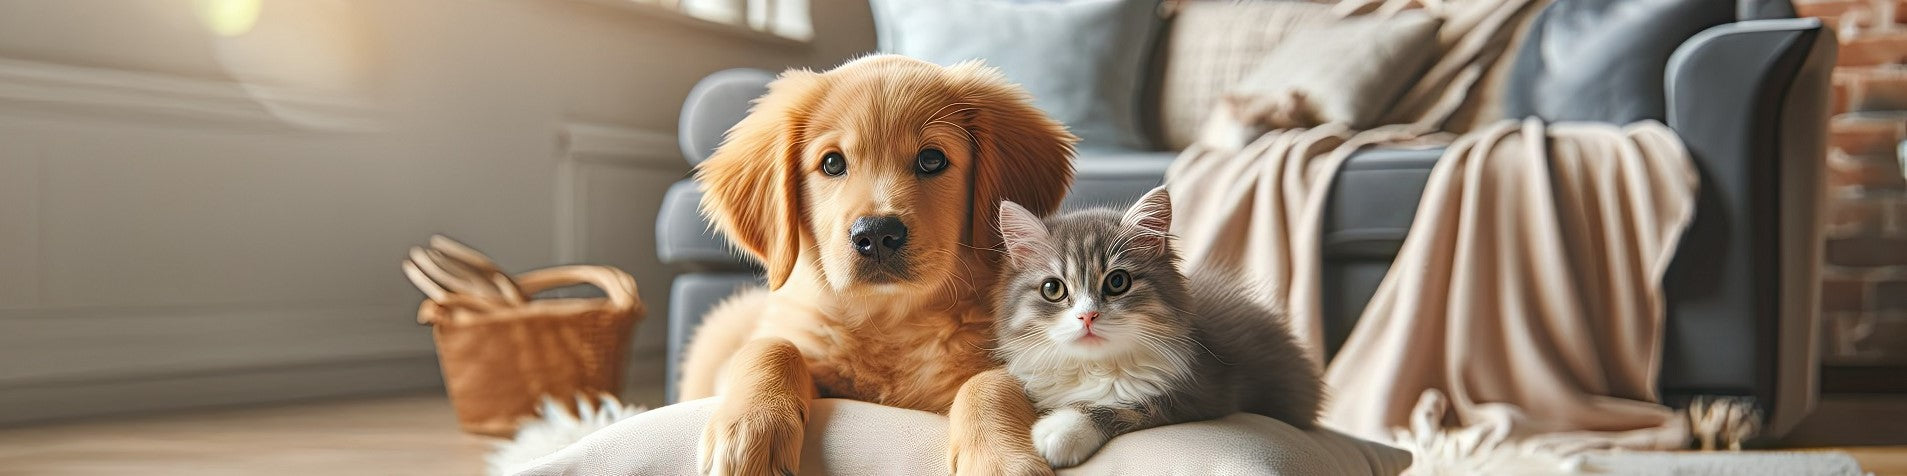 Easy Training Guide for New Puppy and Kitten Owners: Building the Foundation for a Happy Pet